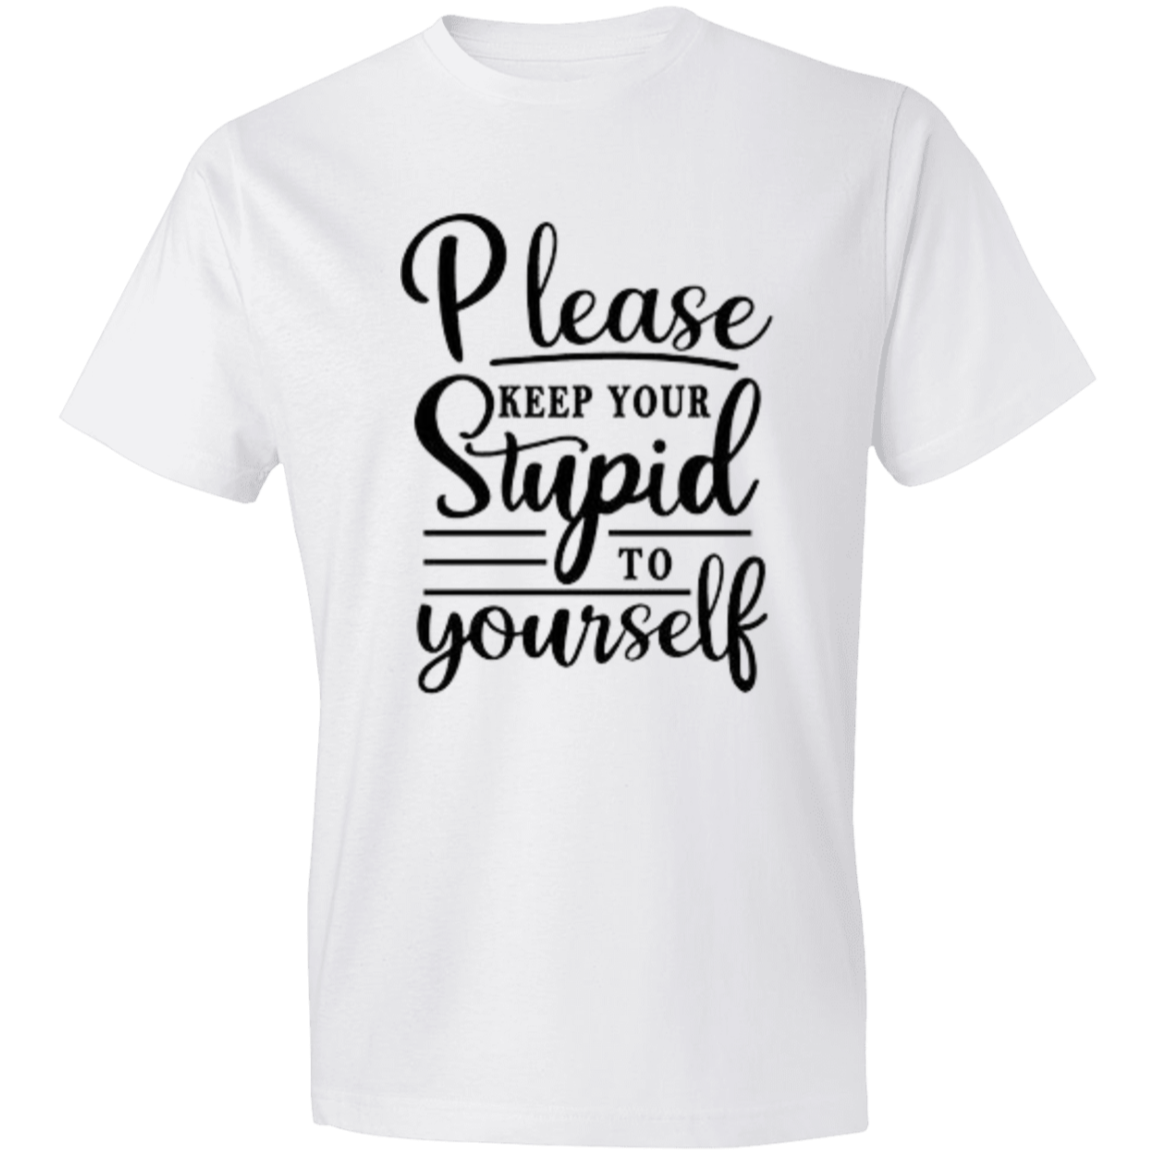 Please Keep Your Stupid to Yourself Unisex Lightweight T-Shirt 4.5 oz